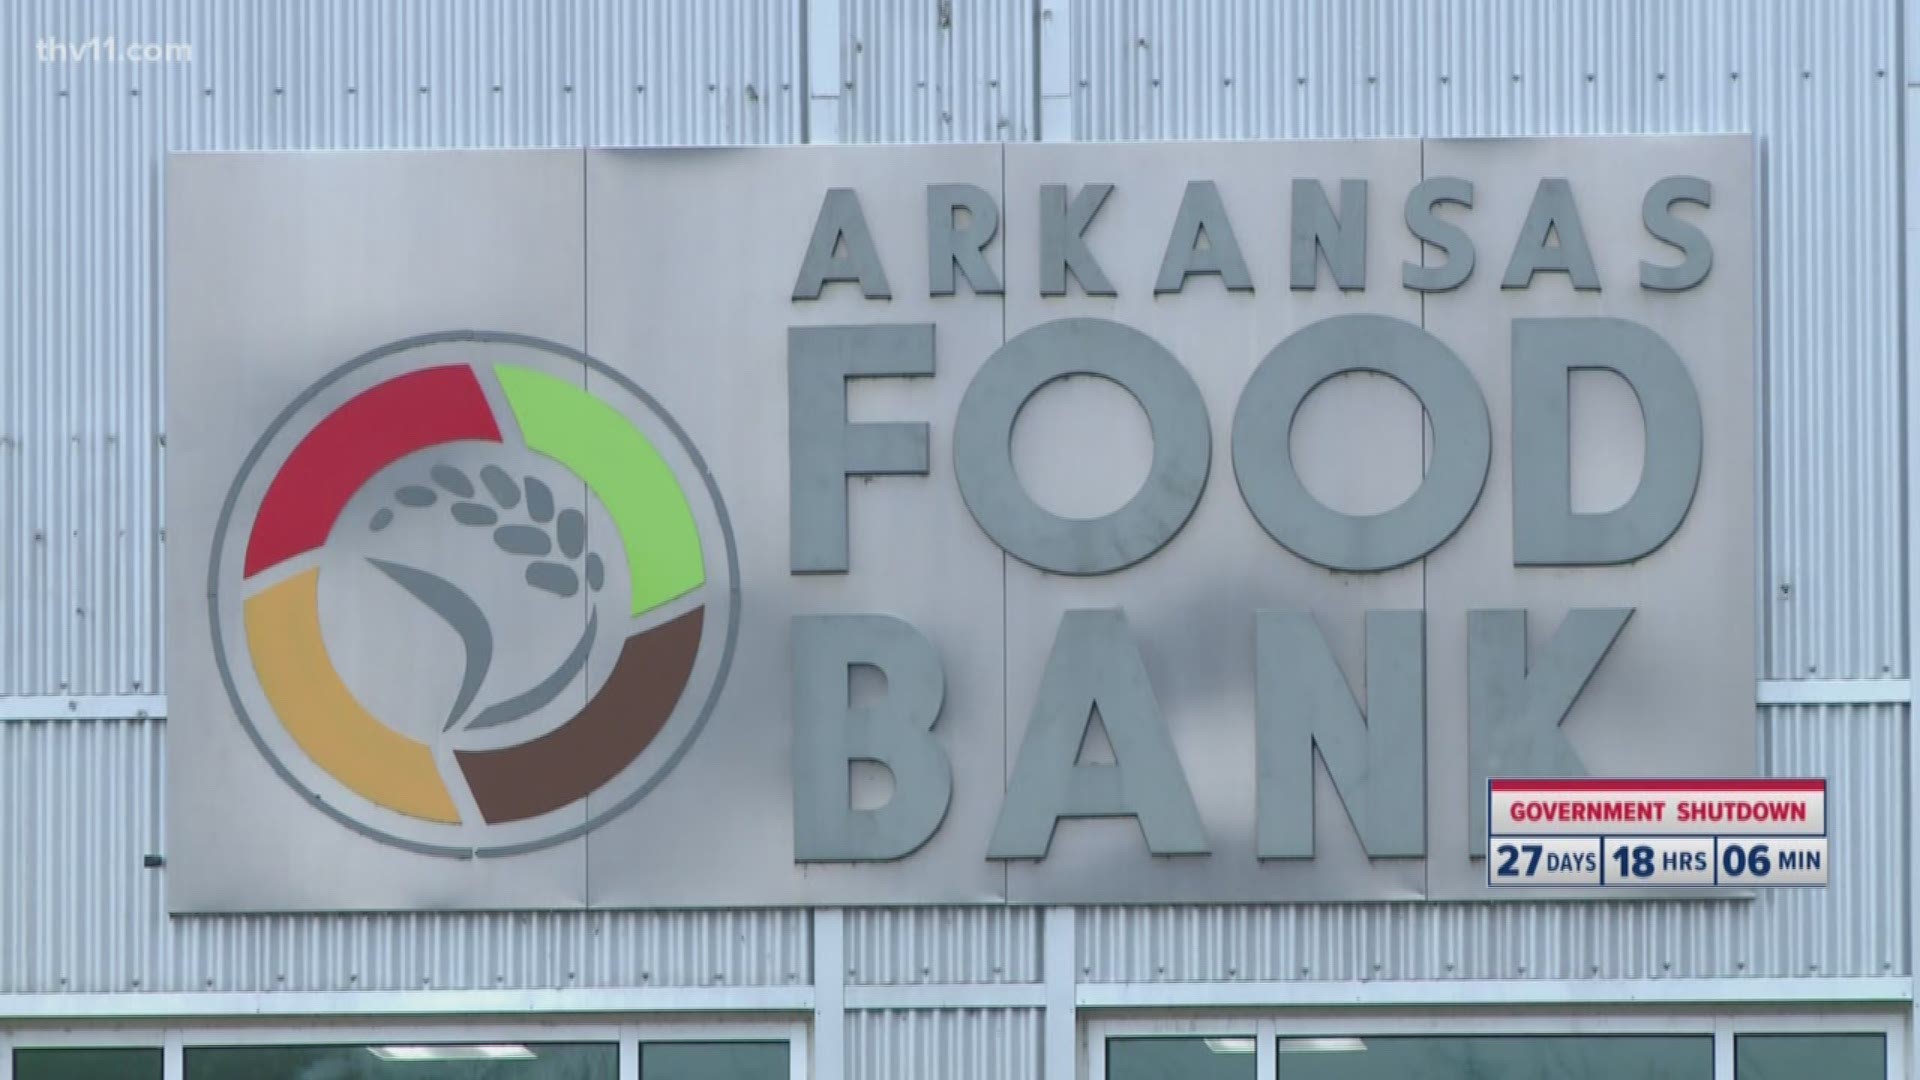 The Arkansas Food Bank is stepping up to help those affected by the shutdown. But as they give more help, they need to receive more as well.